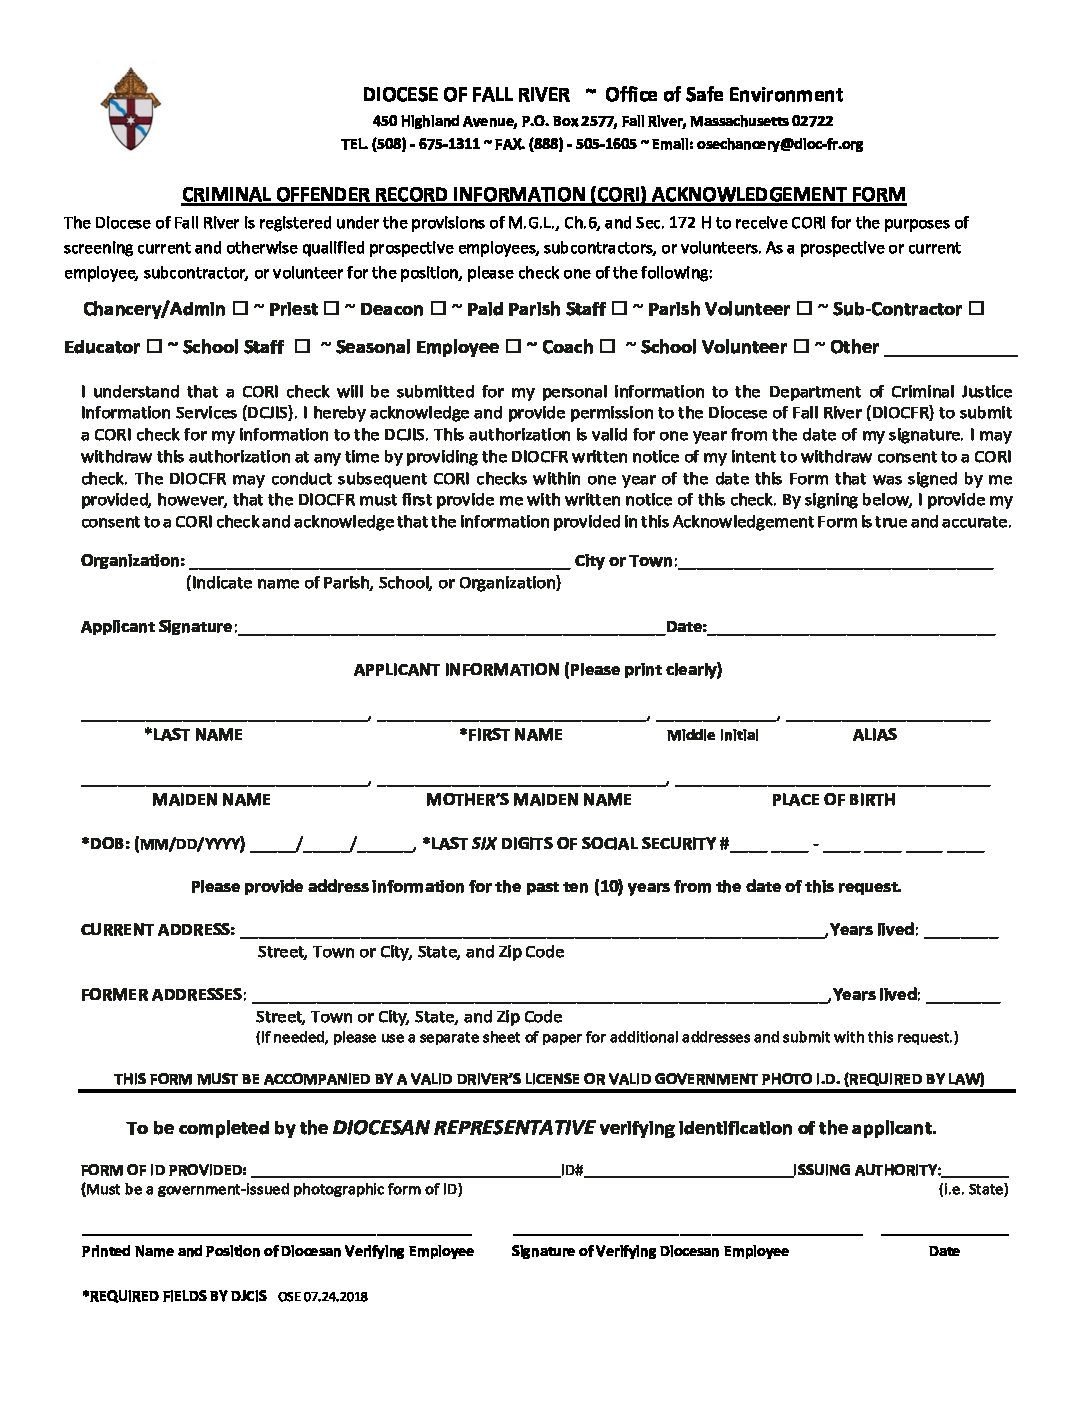 cori-acknowledgment-form-mass-gov-mass-fill-and-sign-printable